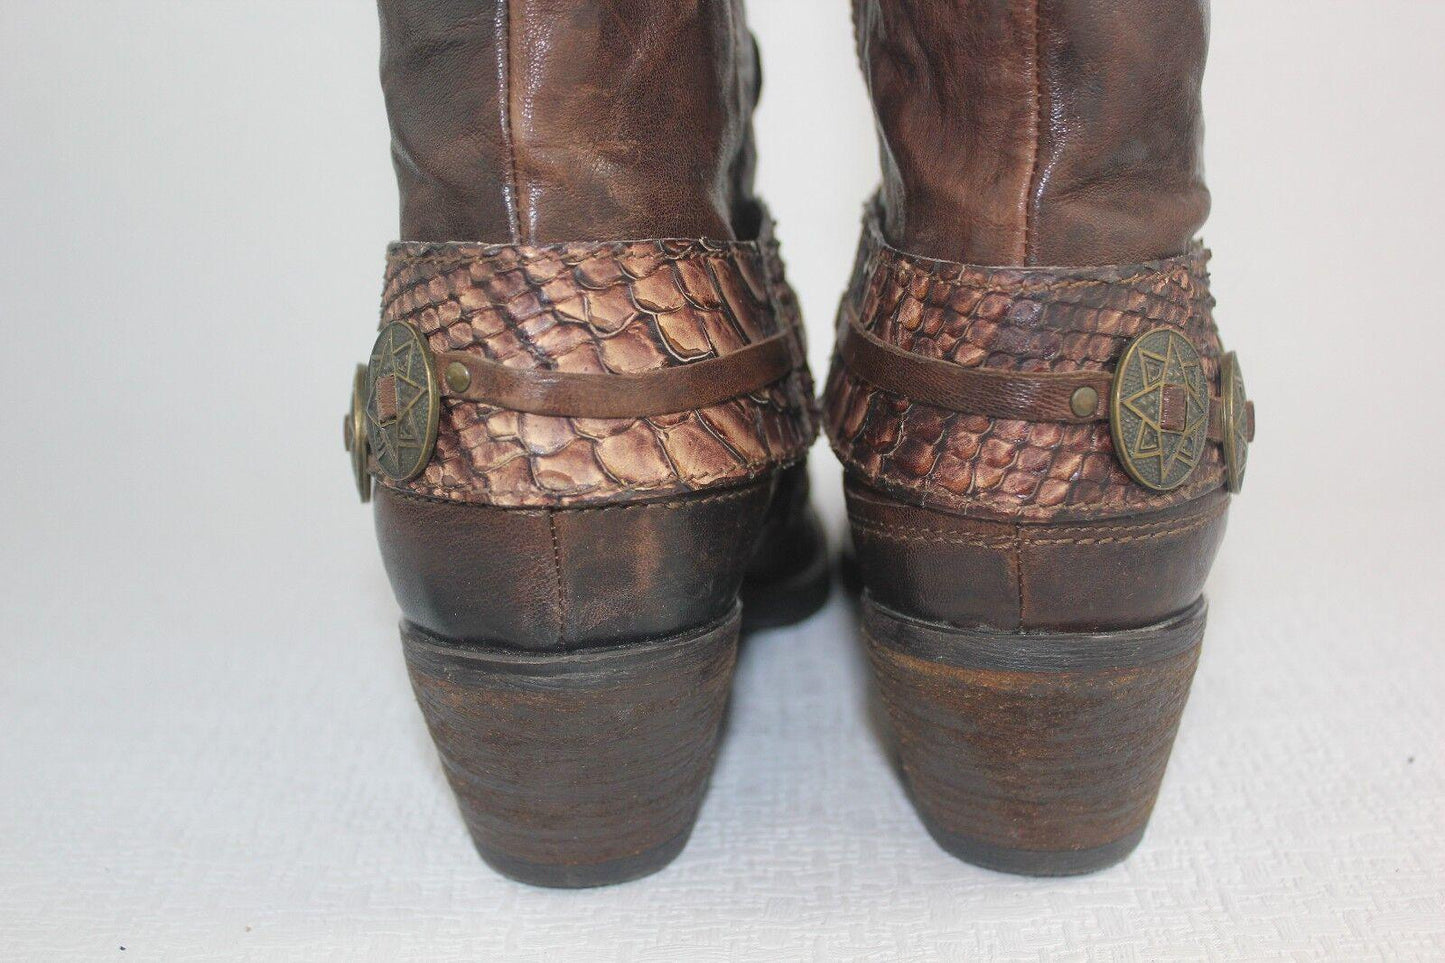 VIC MATE Western Boots Womens Tall Leather Brown Cowgirl Italian Boots  Size 40 - SVNYFancy